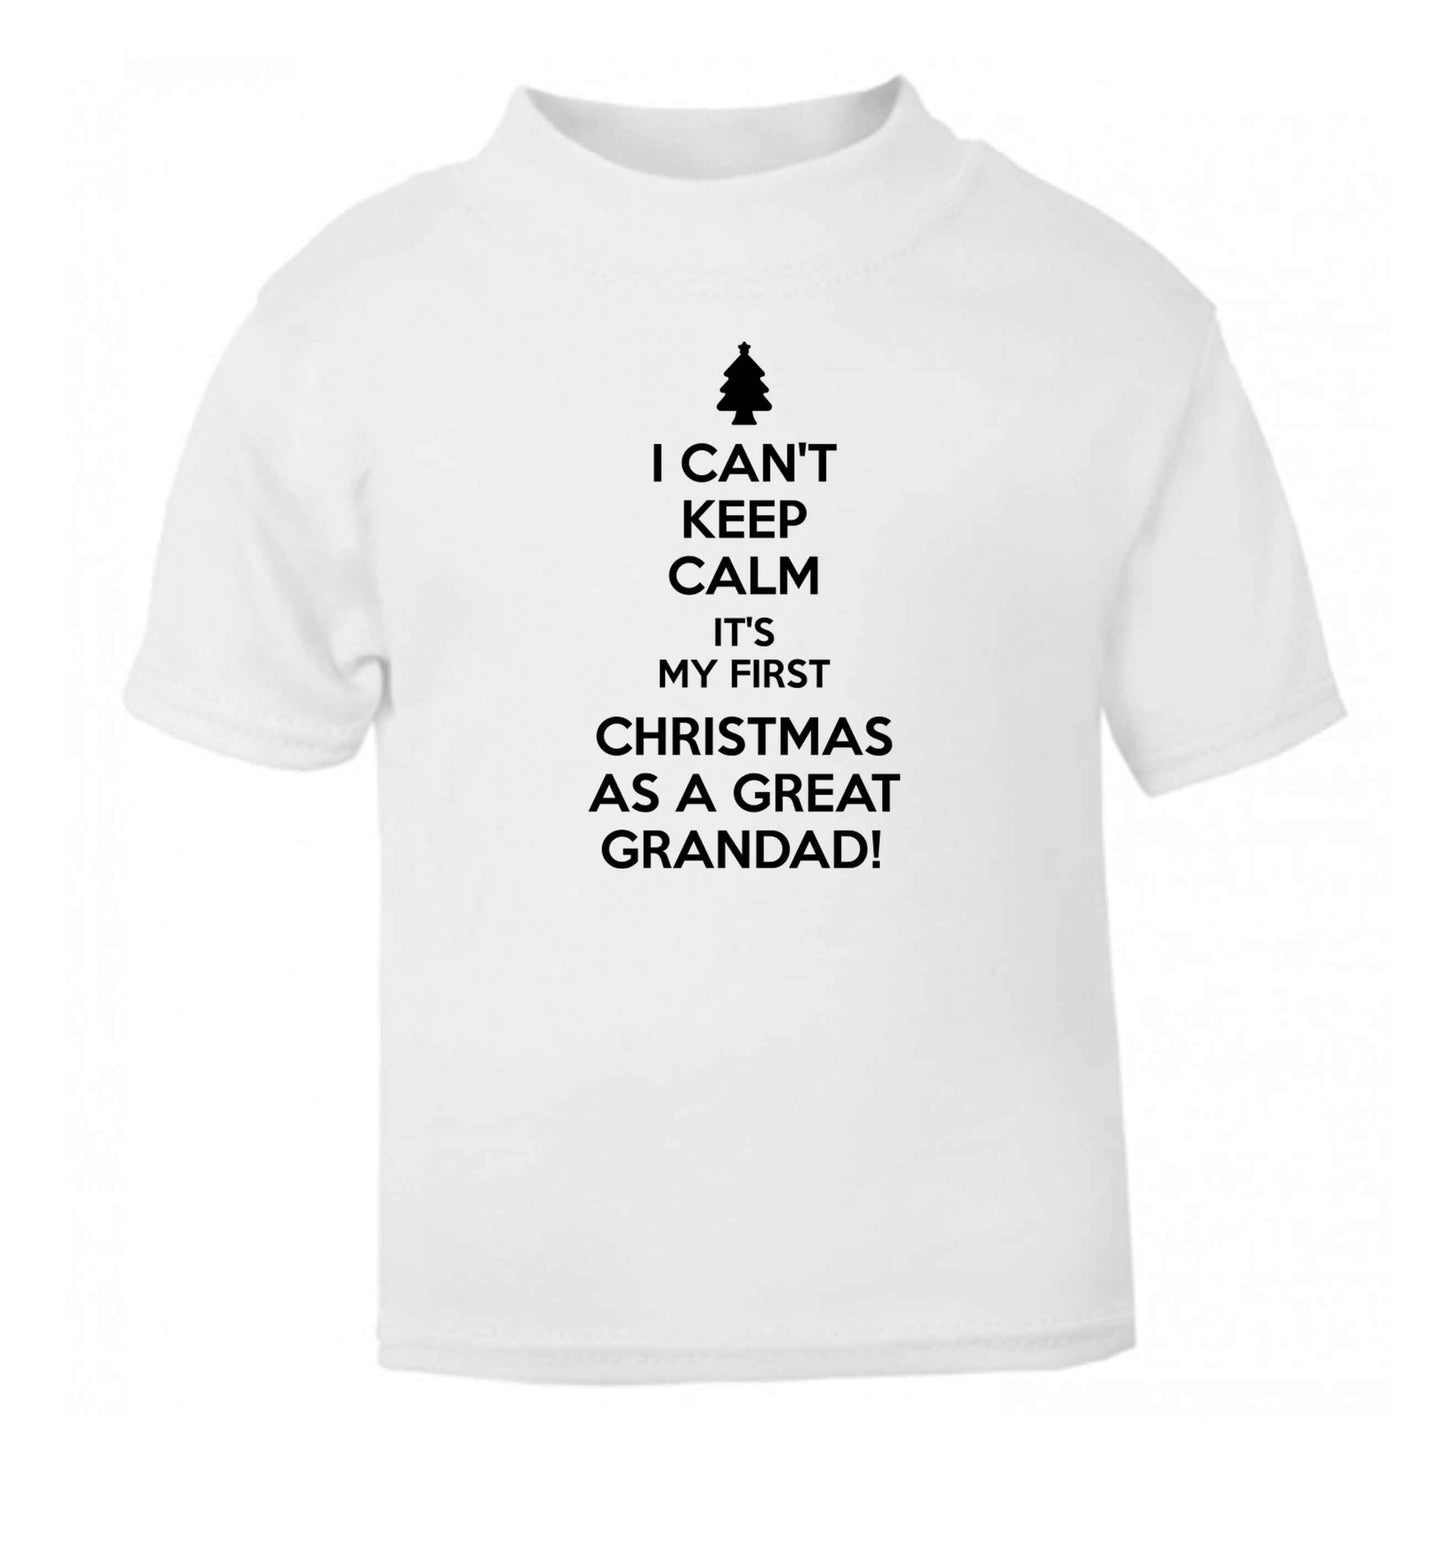 I can't keep calm it's my first Christmas as a great grandad! white Baby Toddler Tshirt 2 Years